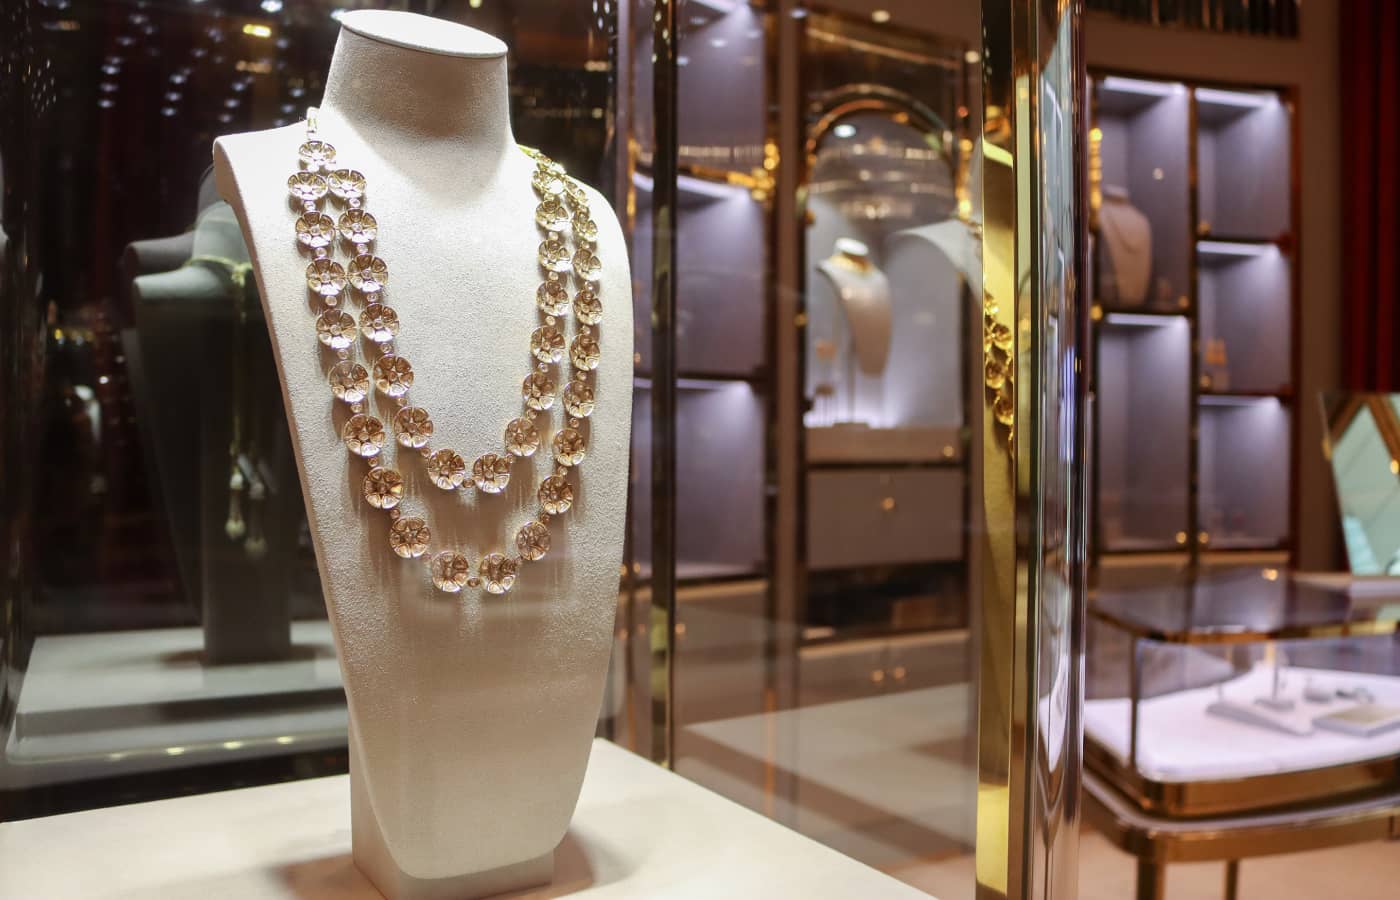 A double strand necklace by Jaipur Gems on display at its new boutique in the Galleria Mall, Dubai